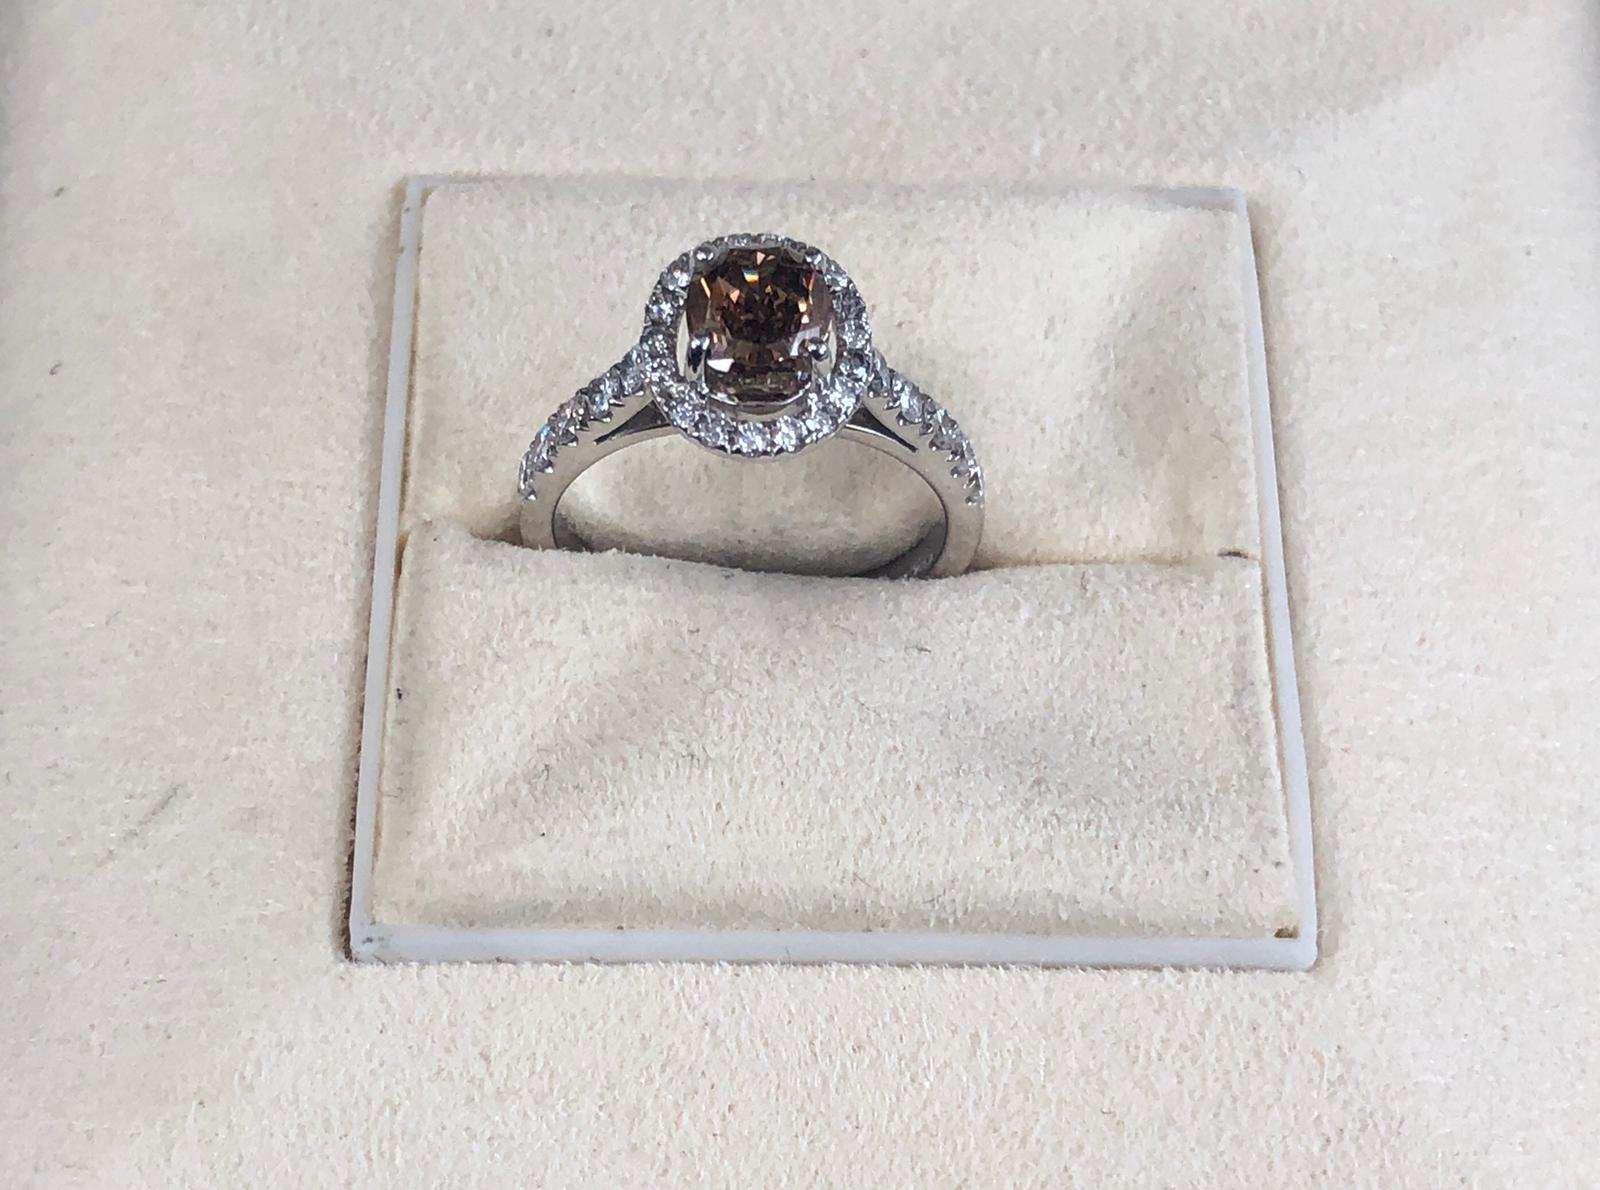 Natural Fancy Dark Orangy Brown Oval Shape Diamond Weighing 1.19 carats by GIA.  Half way paved white diamonds in the halo setting. Its transparency and luster are excellent. set on 18K white gold, this ring is the ultimate gift for anniversaries,